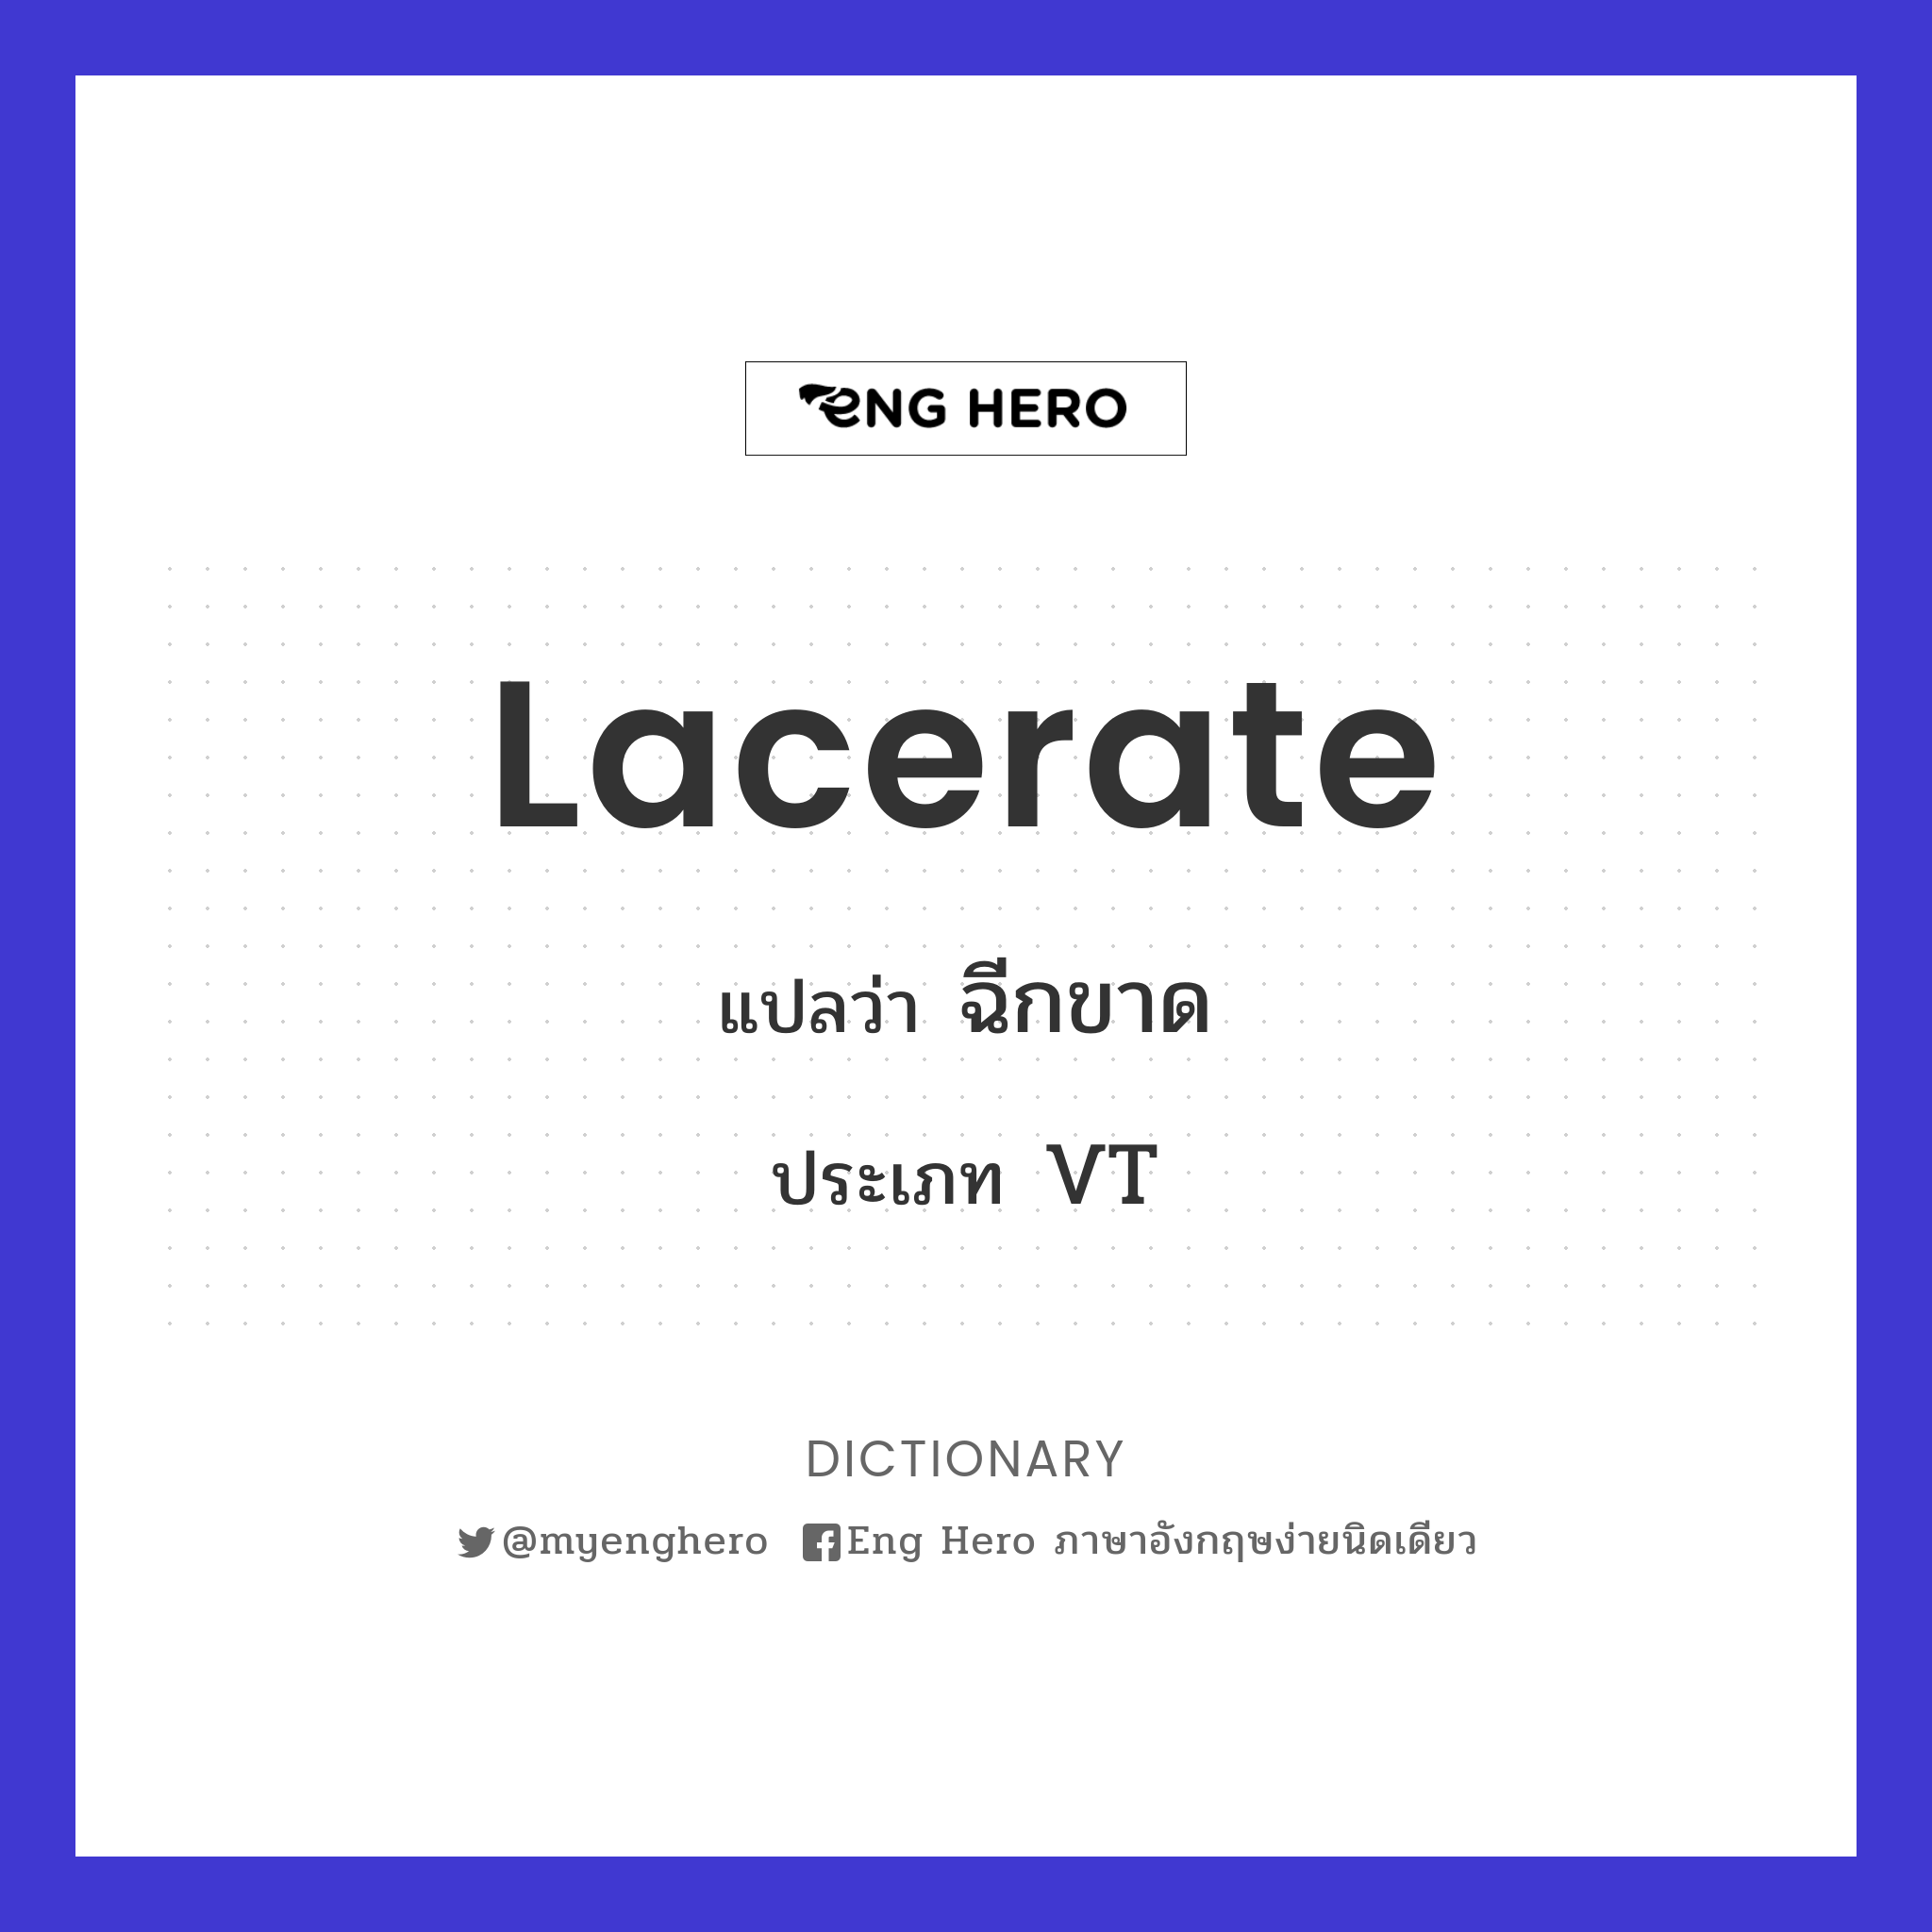 lacerate